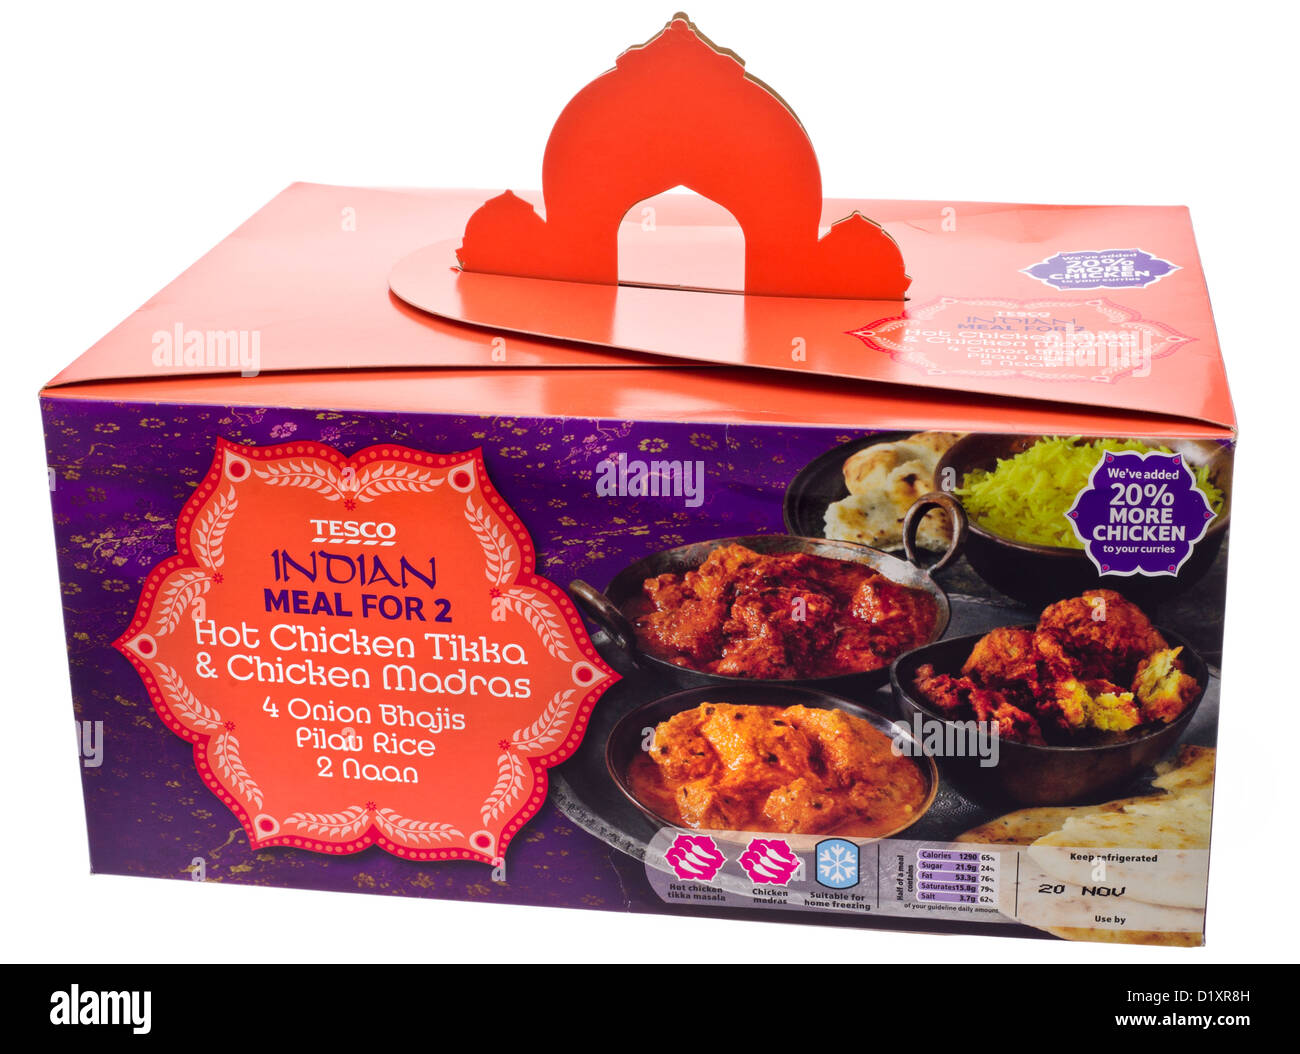 Tesco Indian Take Away Meal for Two. Stock Photo